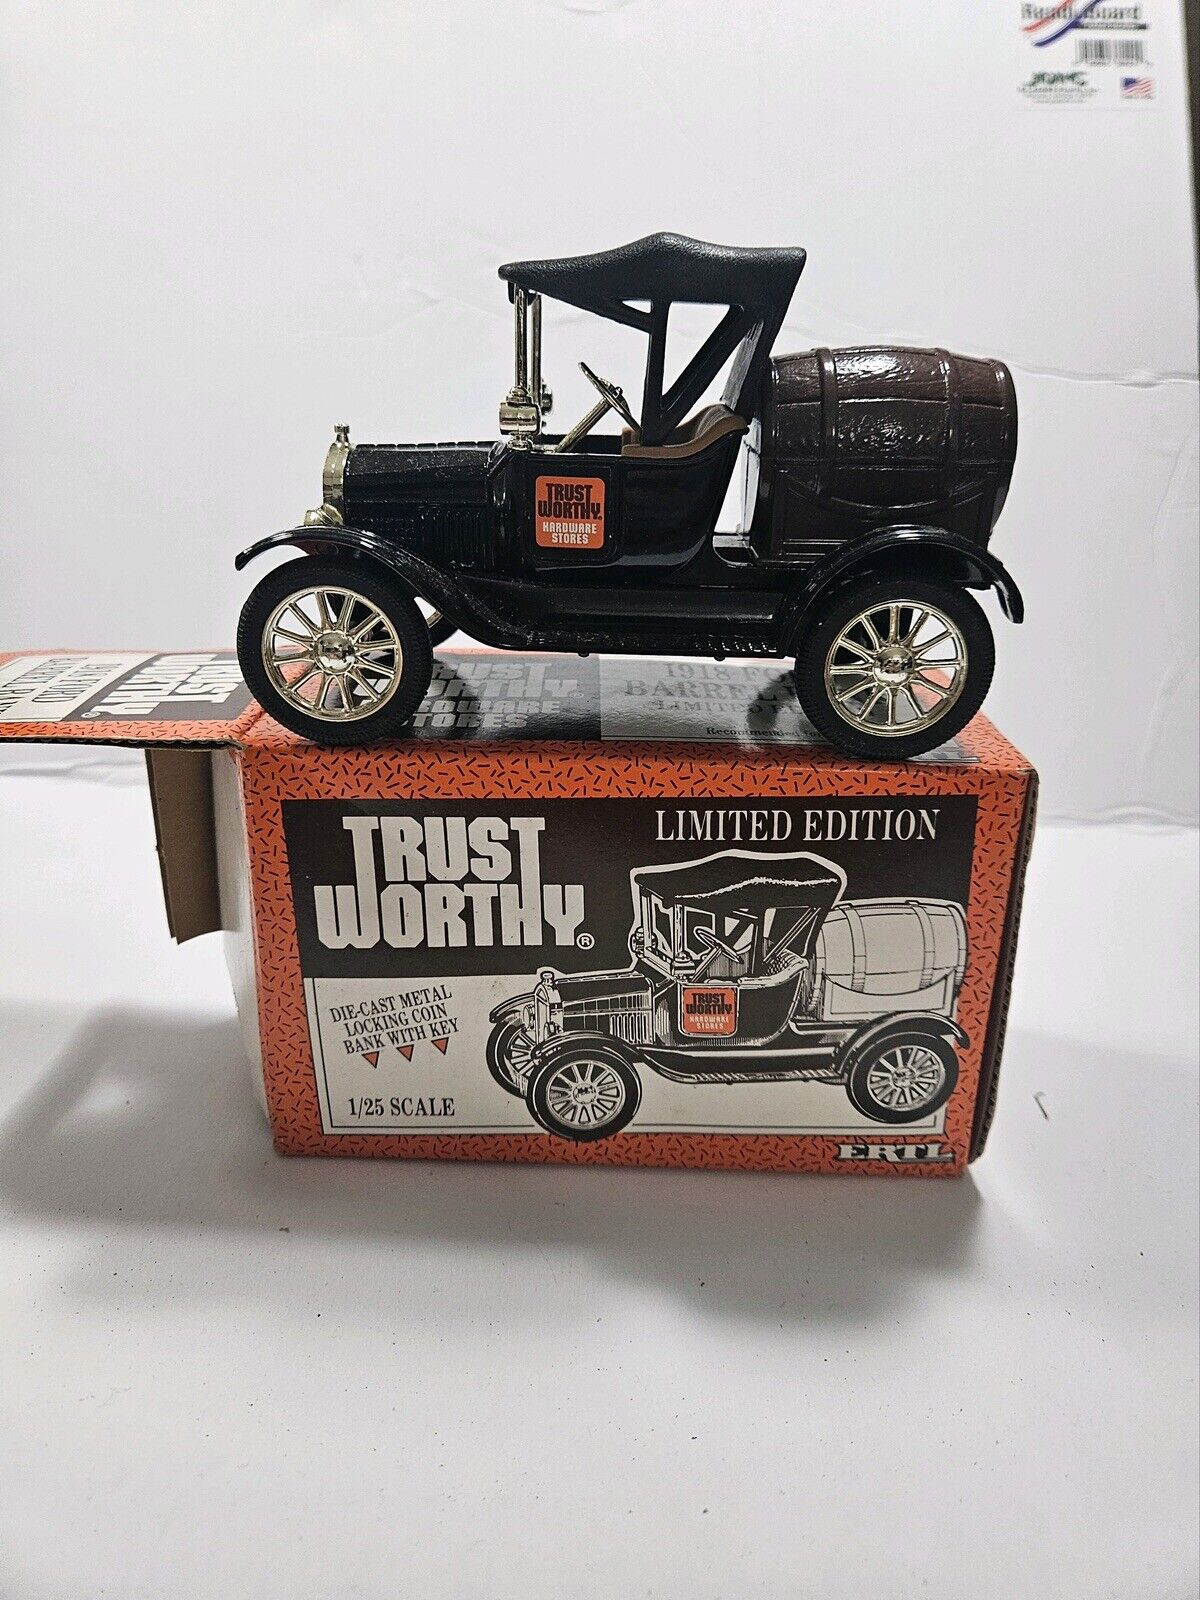 Ertl Die cast Trustworthy 1918 Ford Barrel Truck  New In Box Collectible Bank